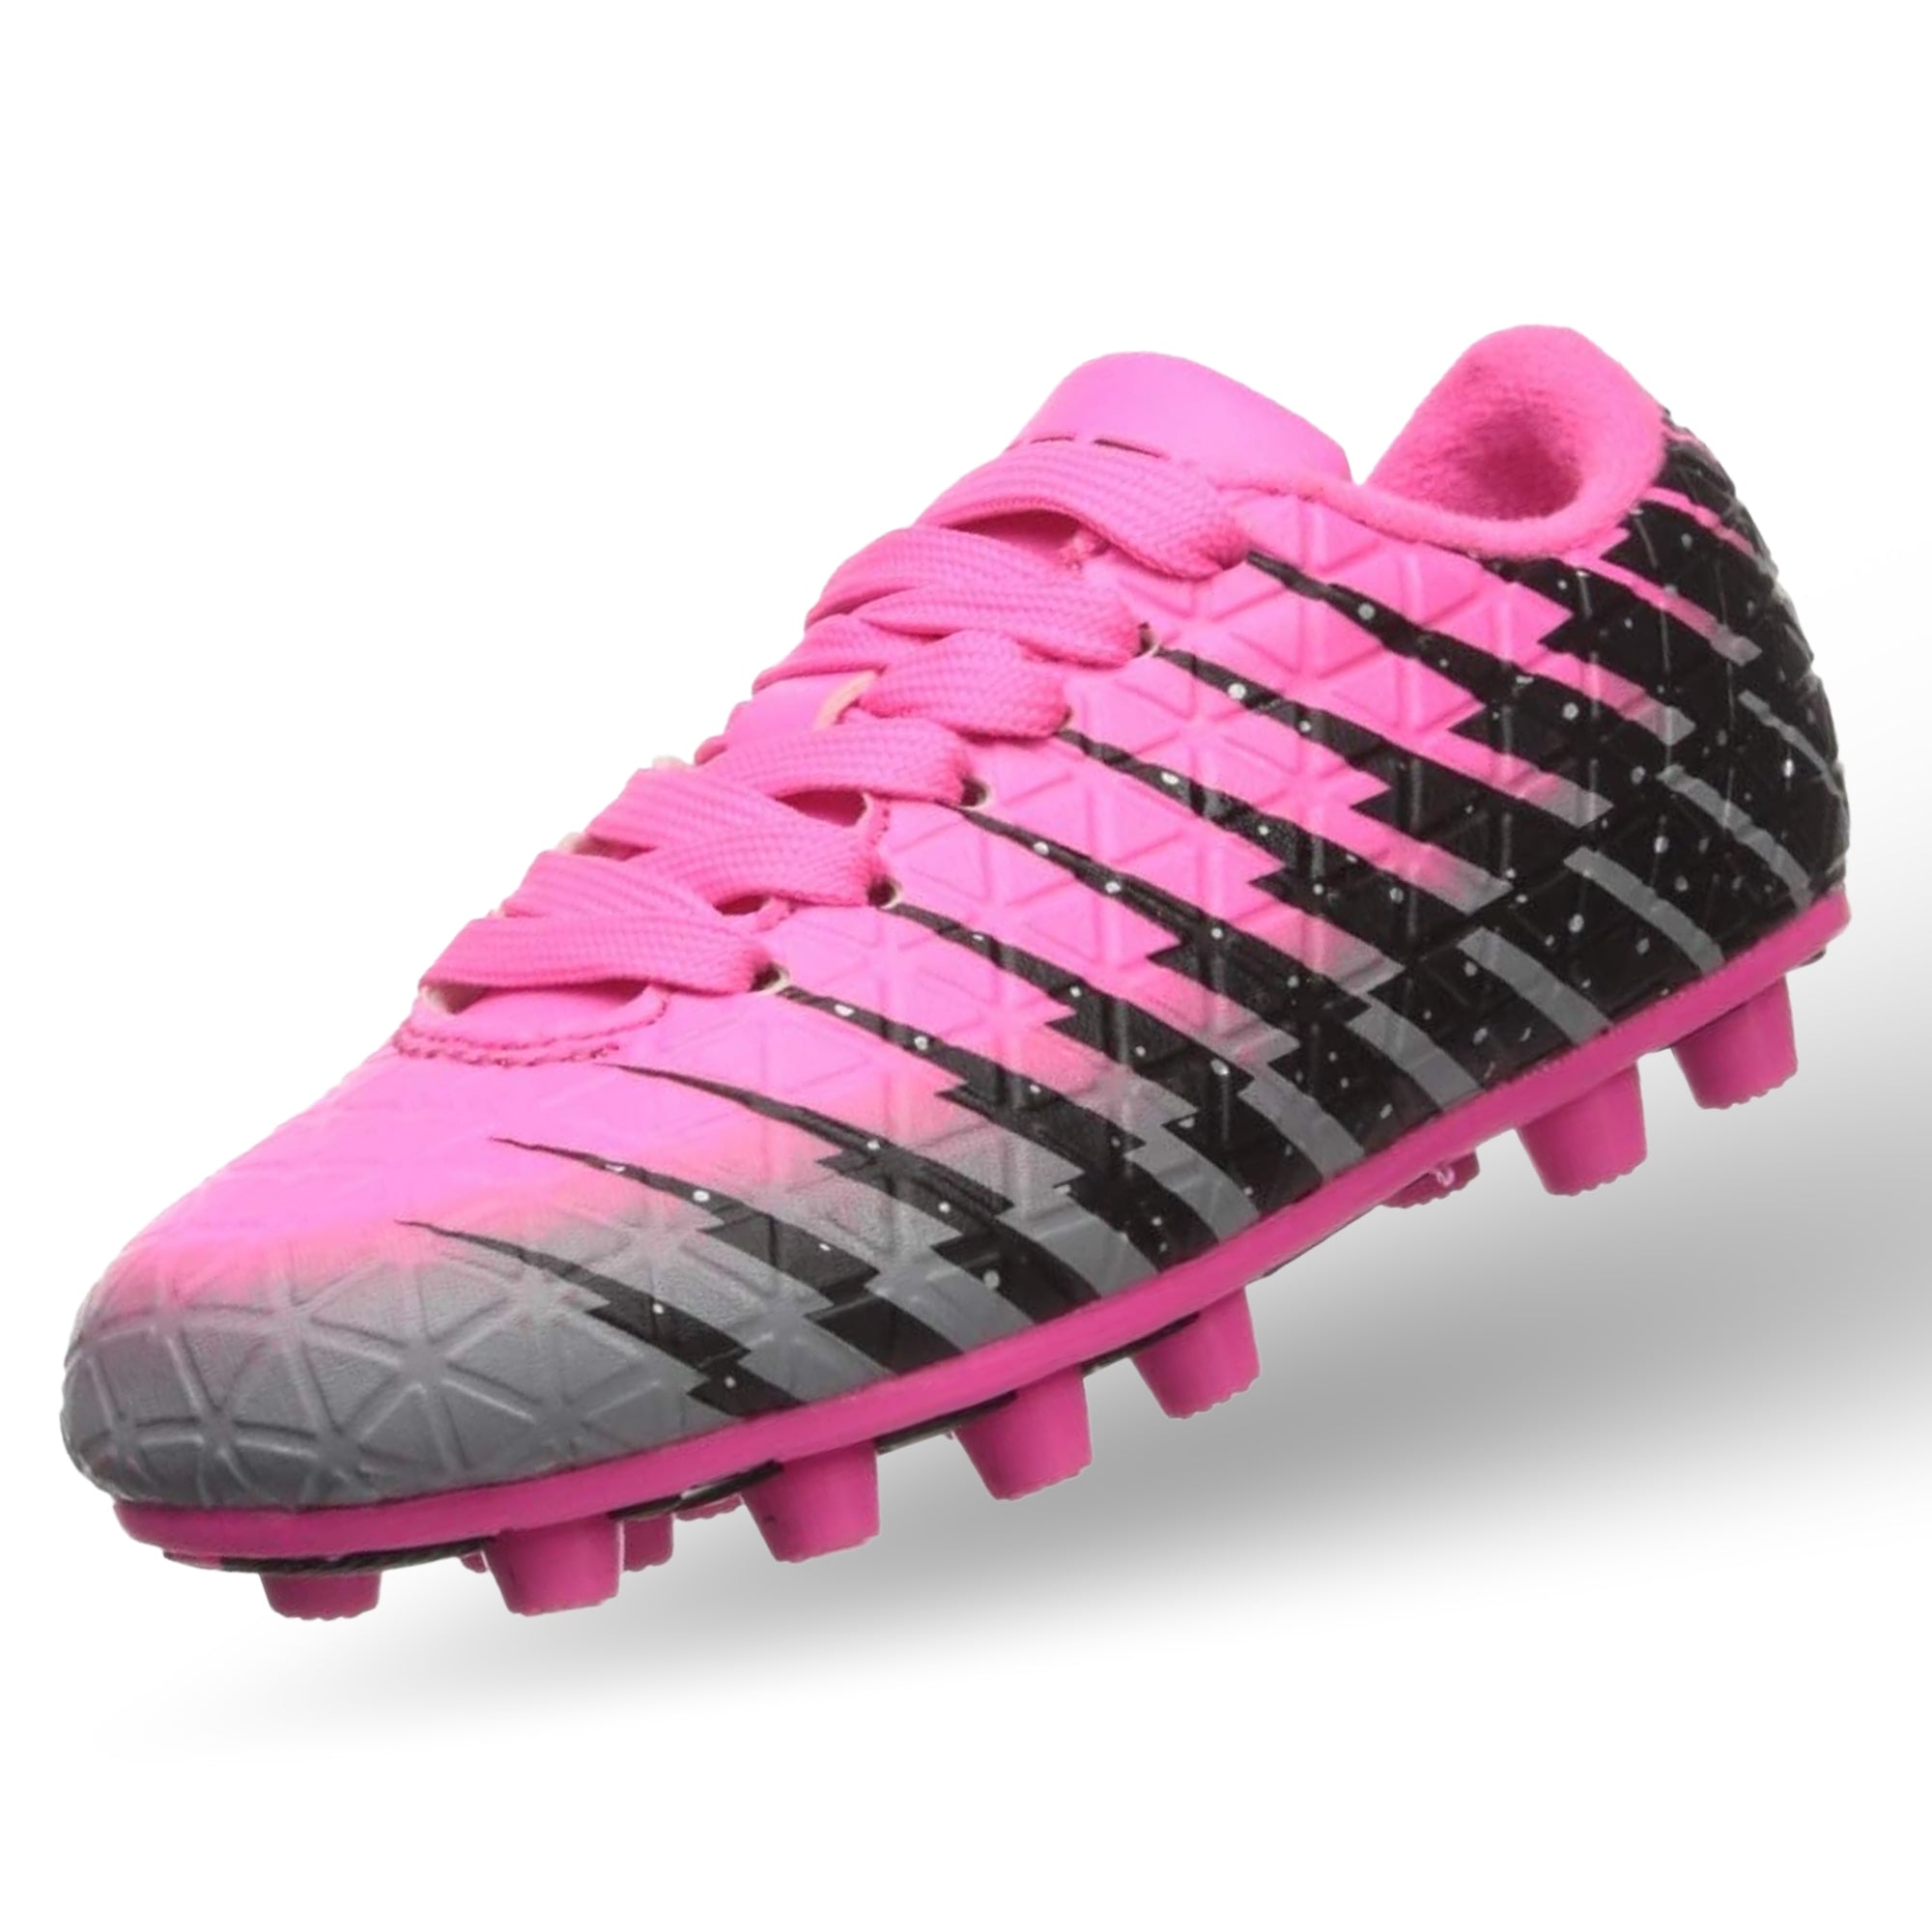 Bolt Firm Ground Soccer Shoes-Pink/Black/Silver